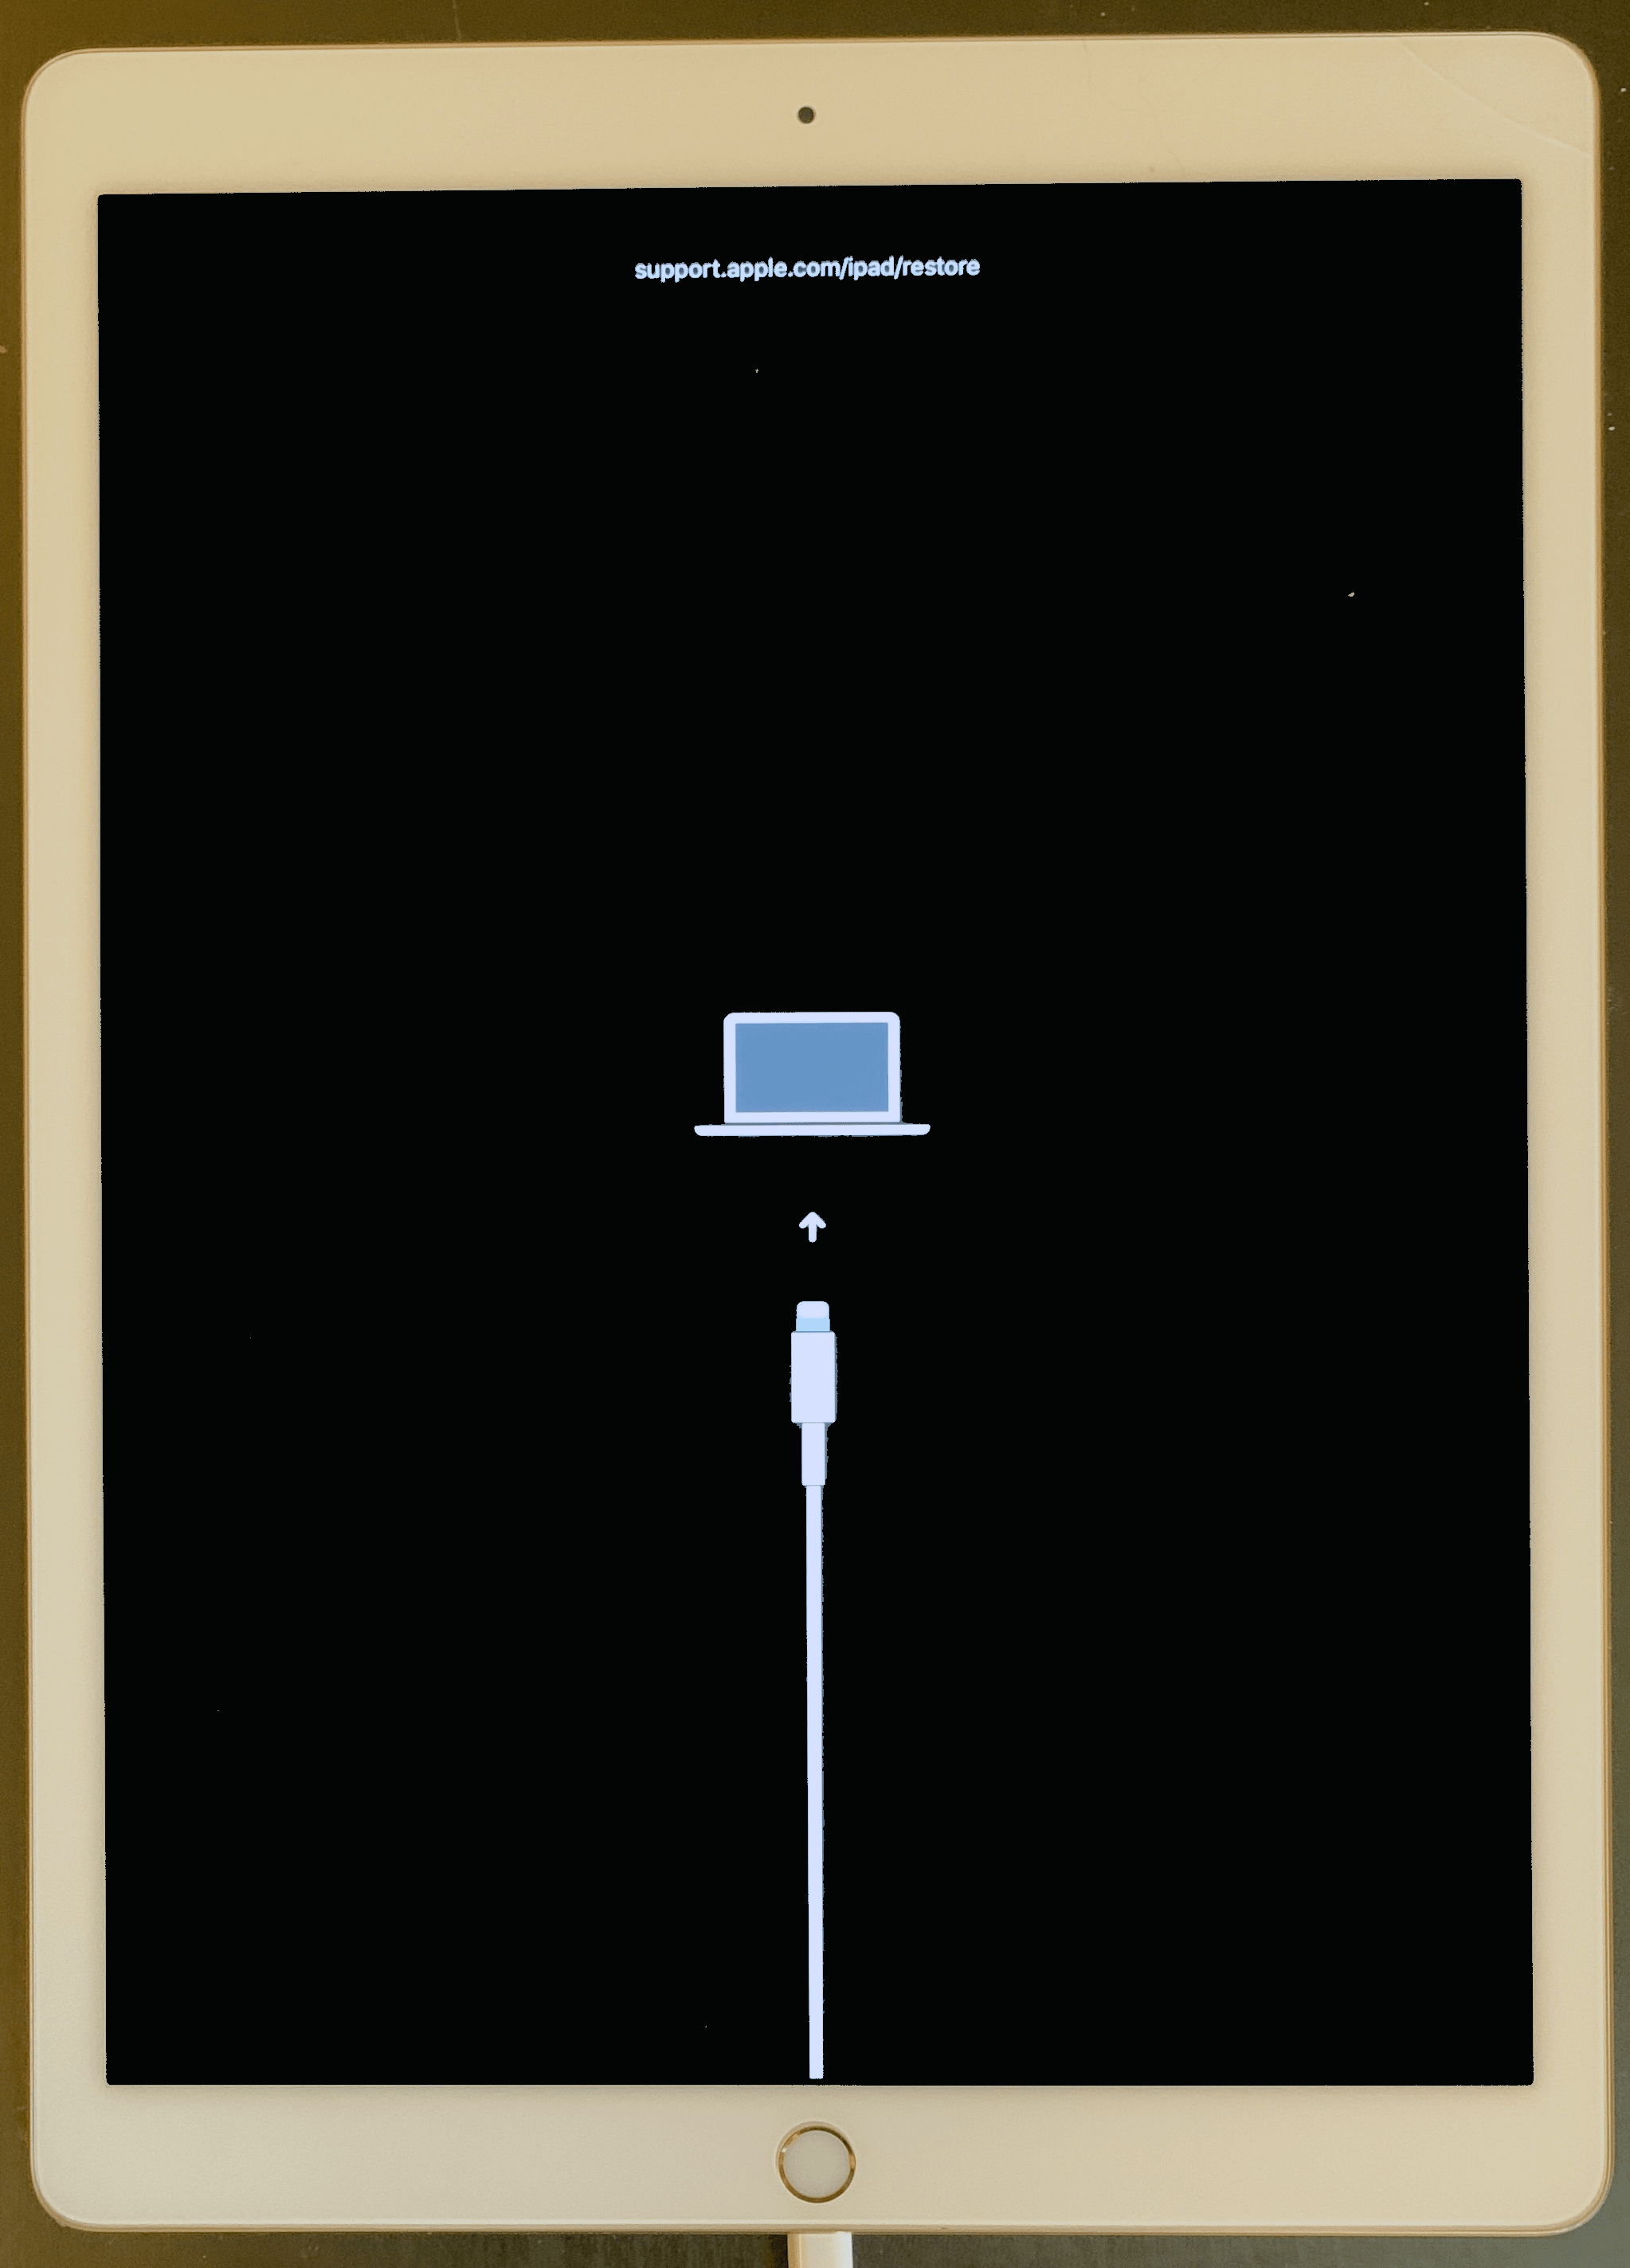 The Recovery Mode screen on an iPad, which displays a link to Apple's support page, and icons showing a charging cable connecting to a laptop.